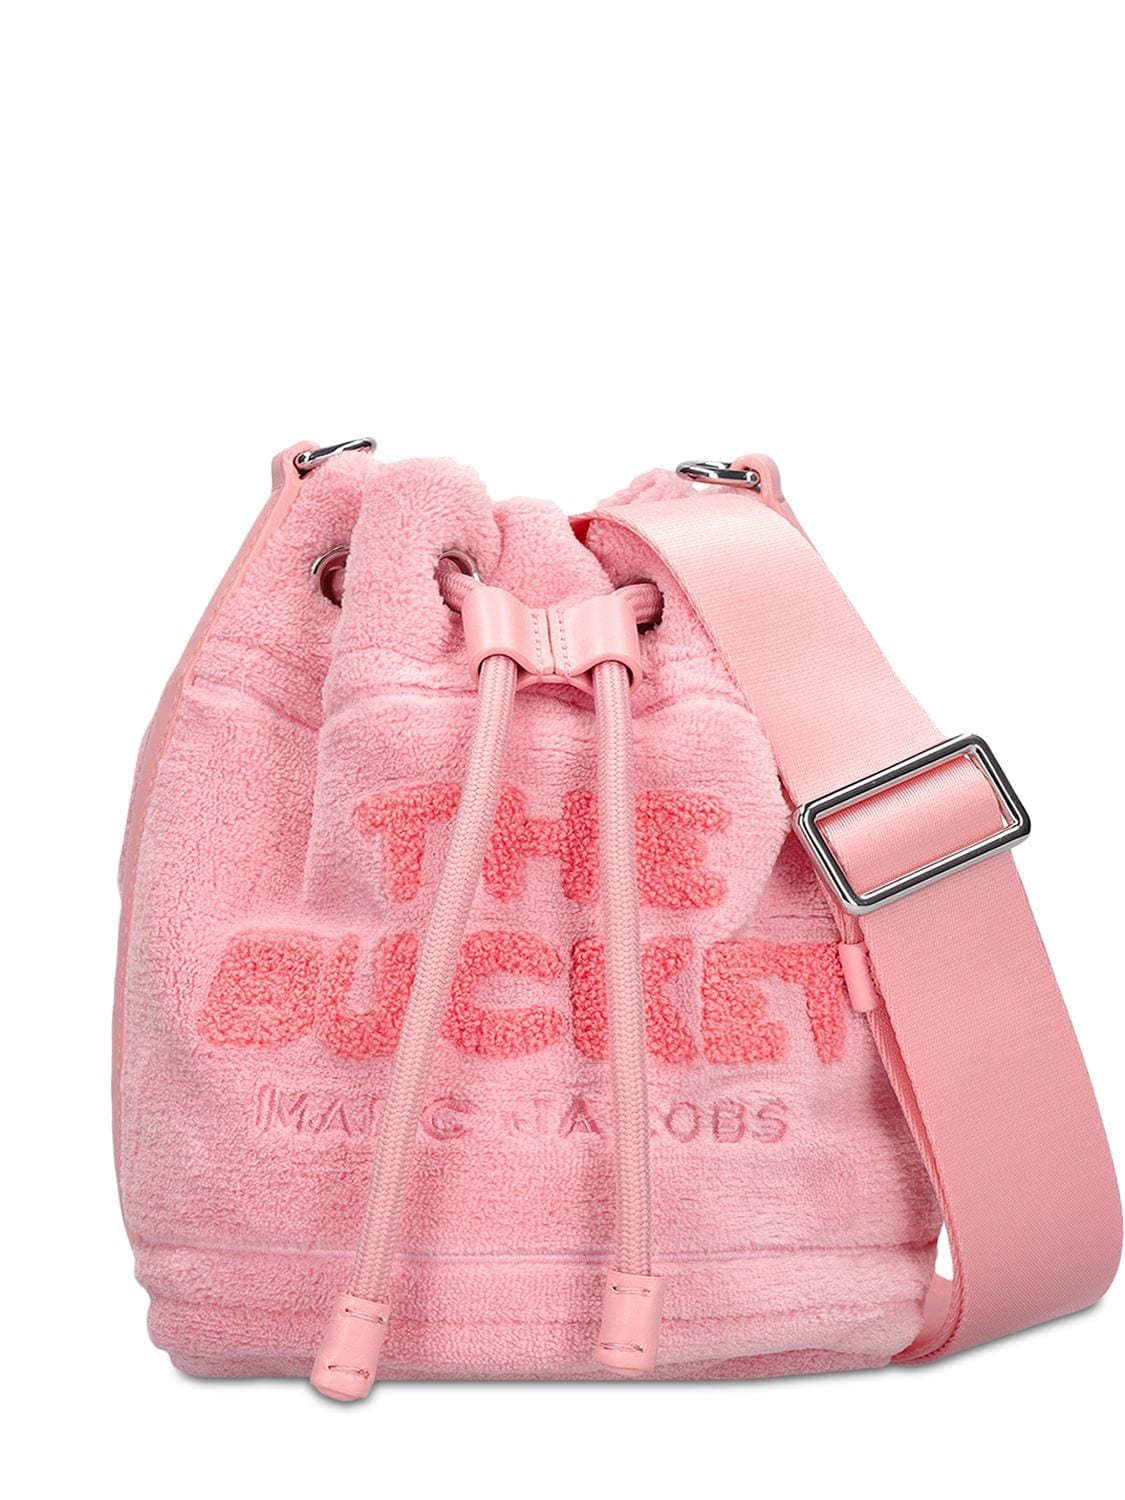 MARC JACOBS (THE) The Terry Bucket Bag